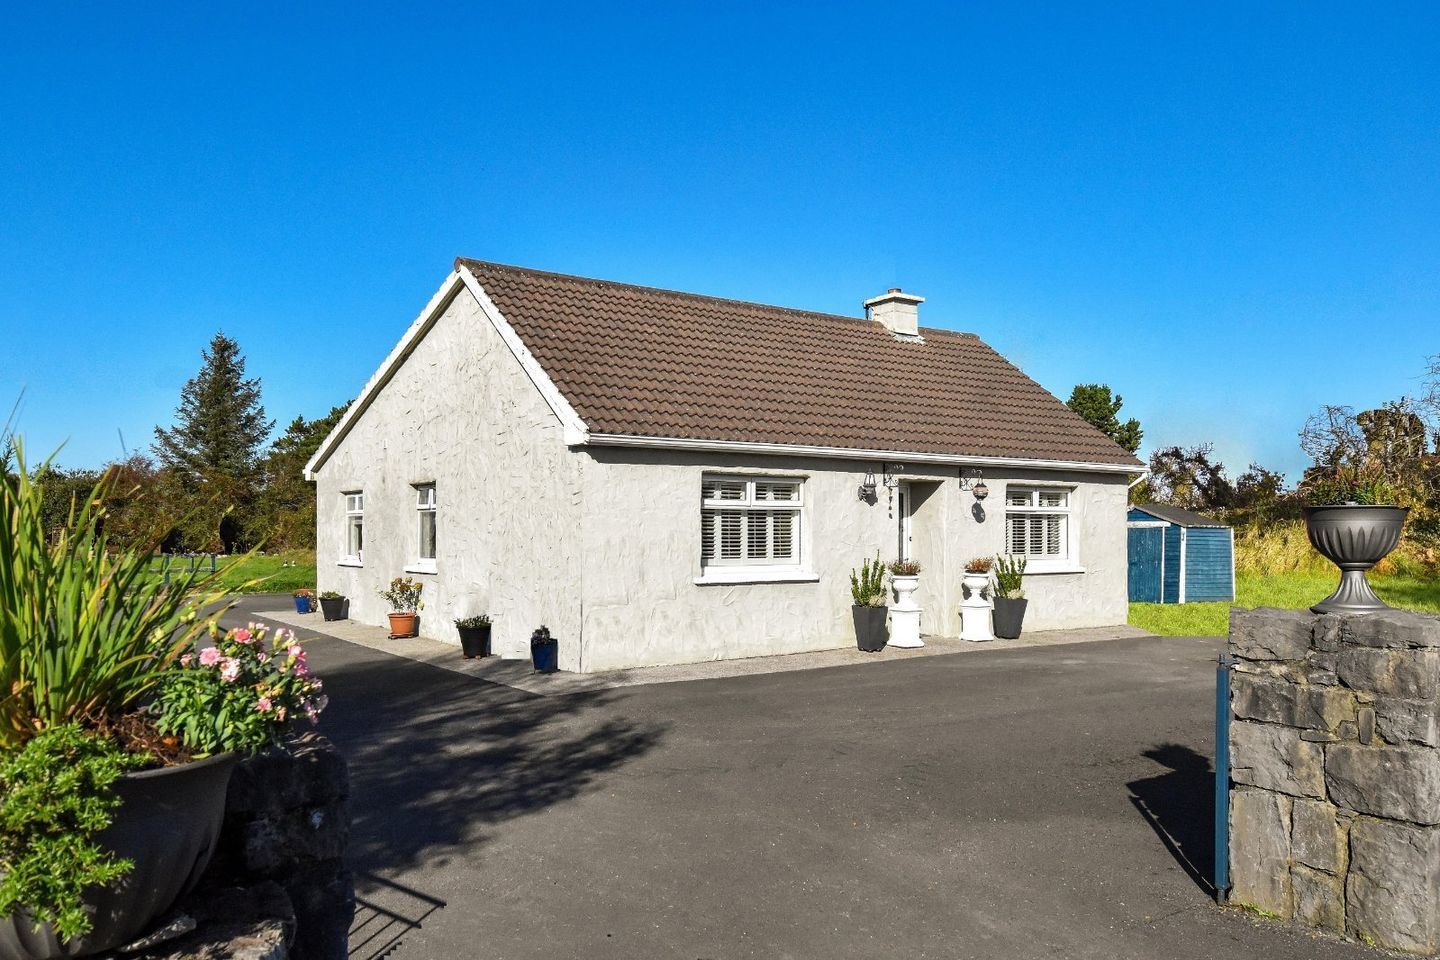 Gortachalla, Moycullen, Co. Galway, H91N9FK is for sale on Daft.ie